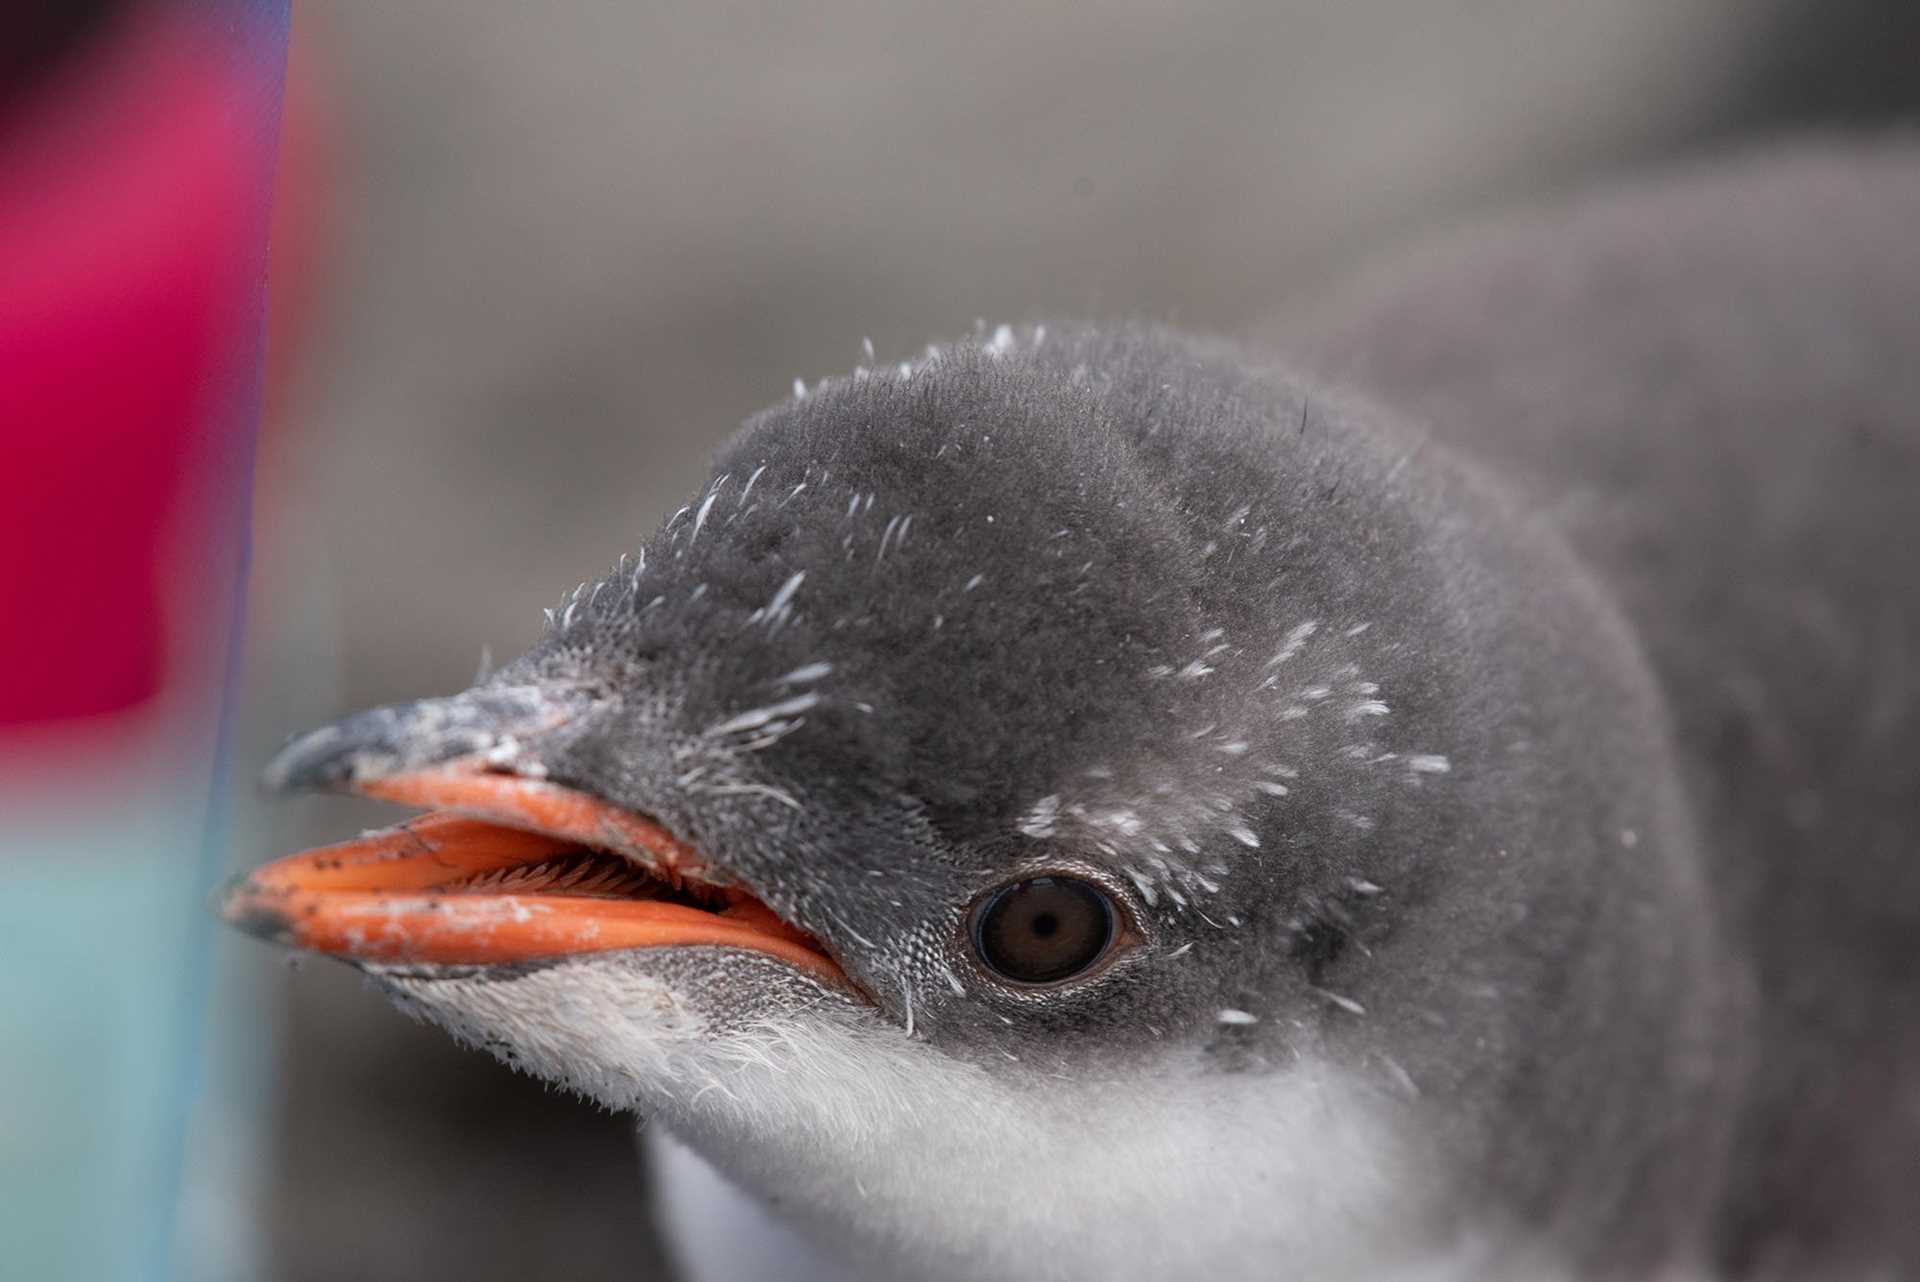 close-up of a baby gentoo penguin with a fuzzy gray head